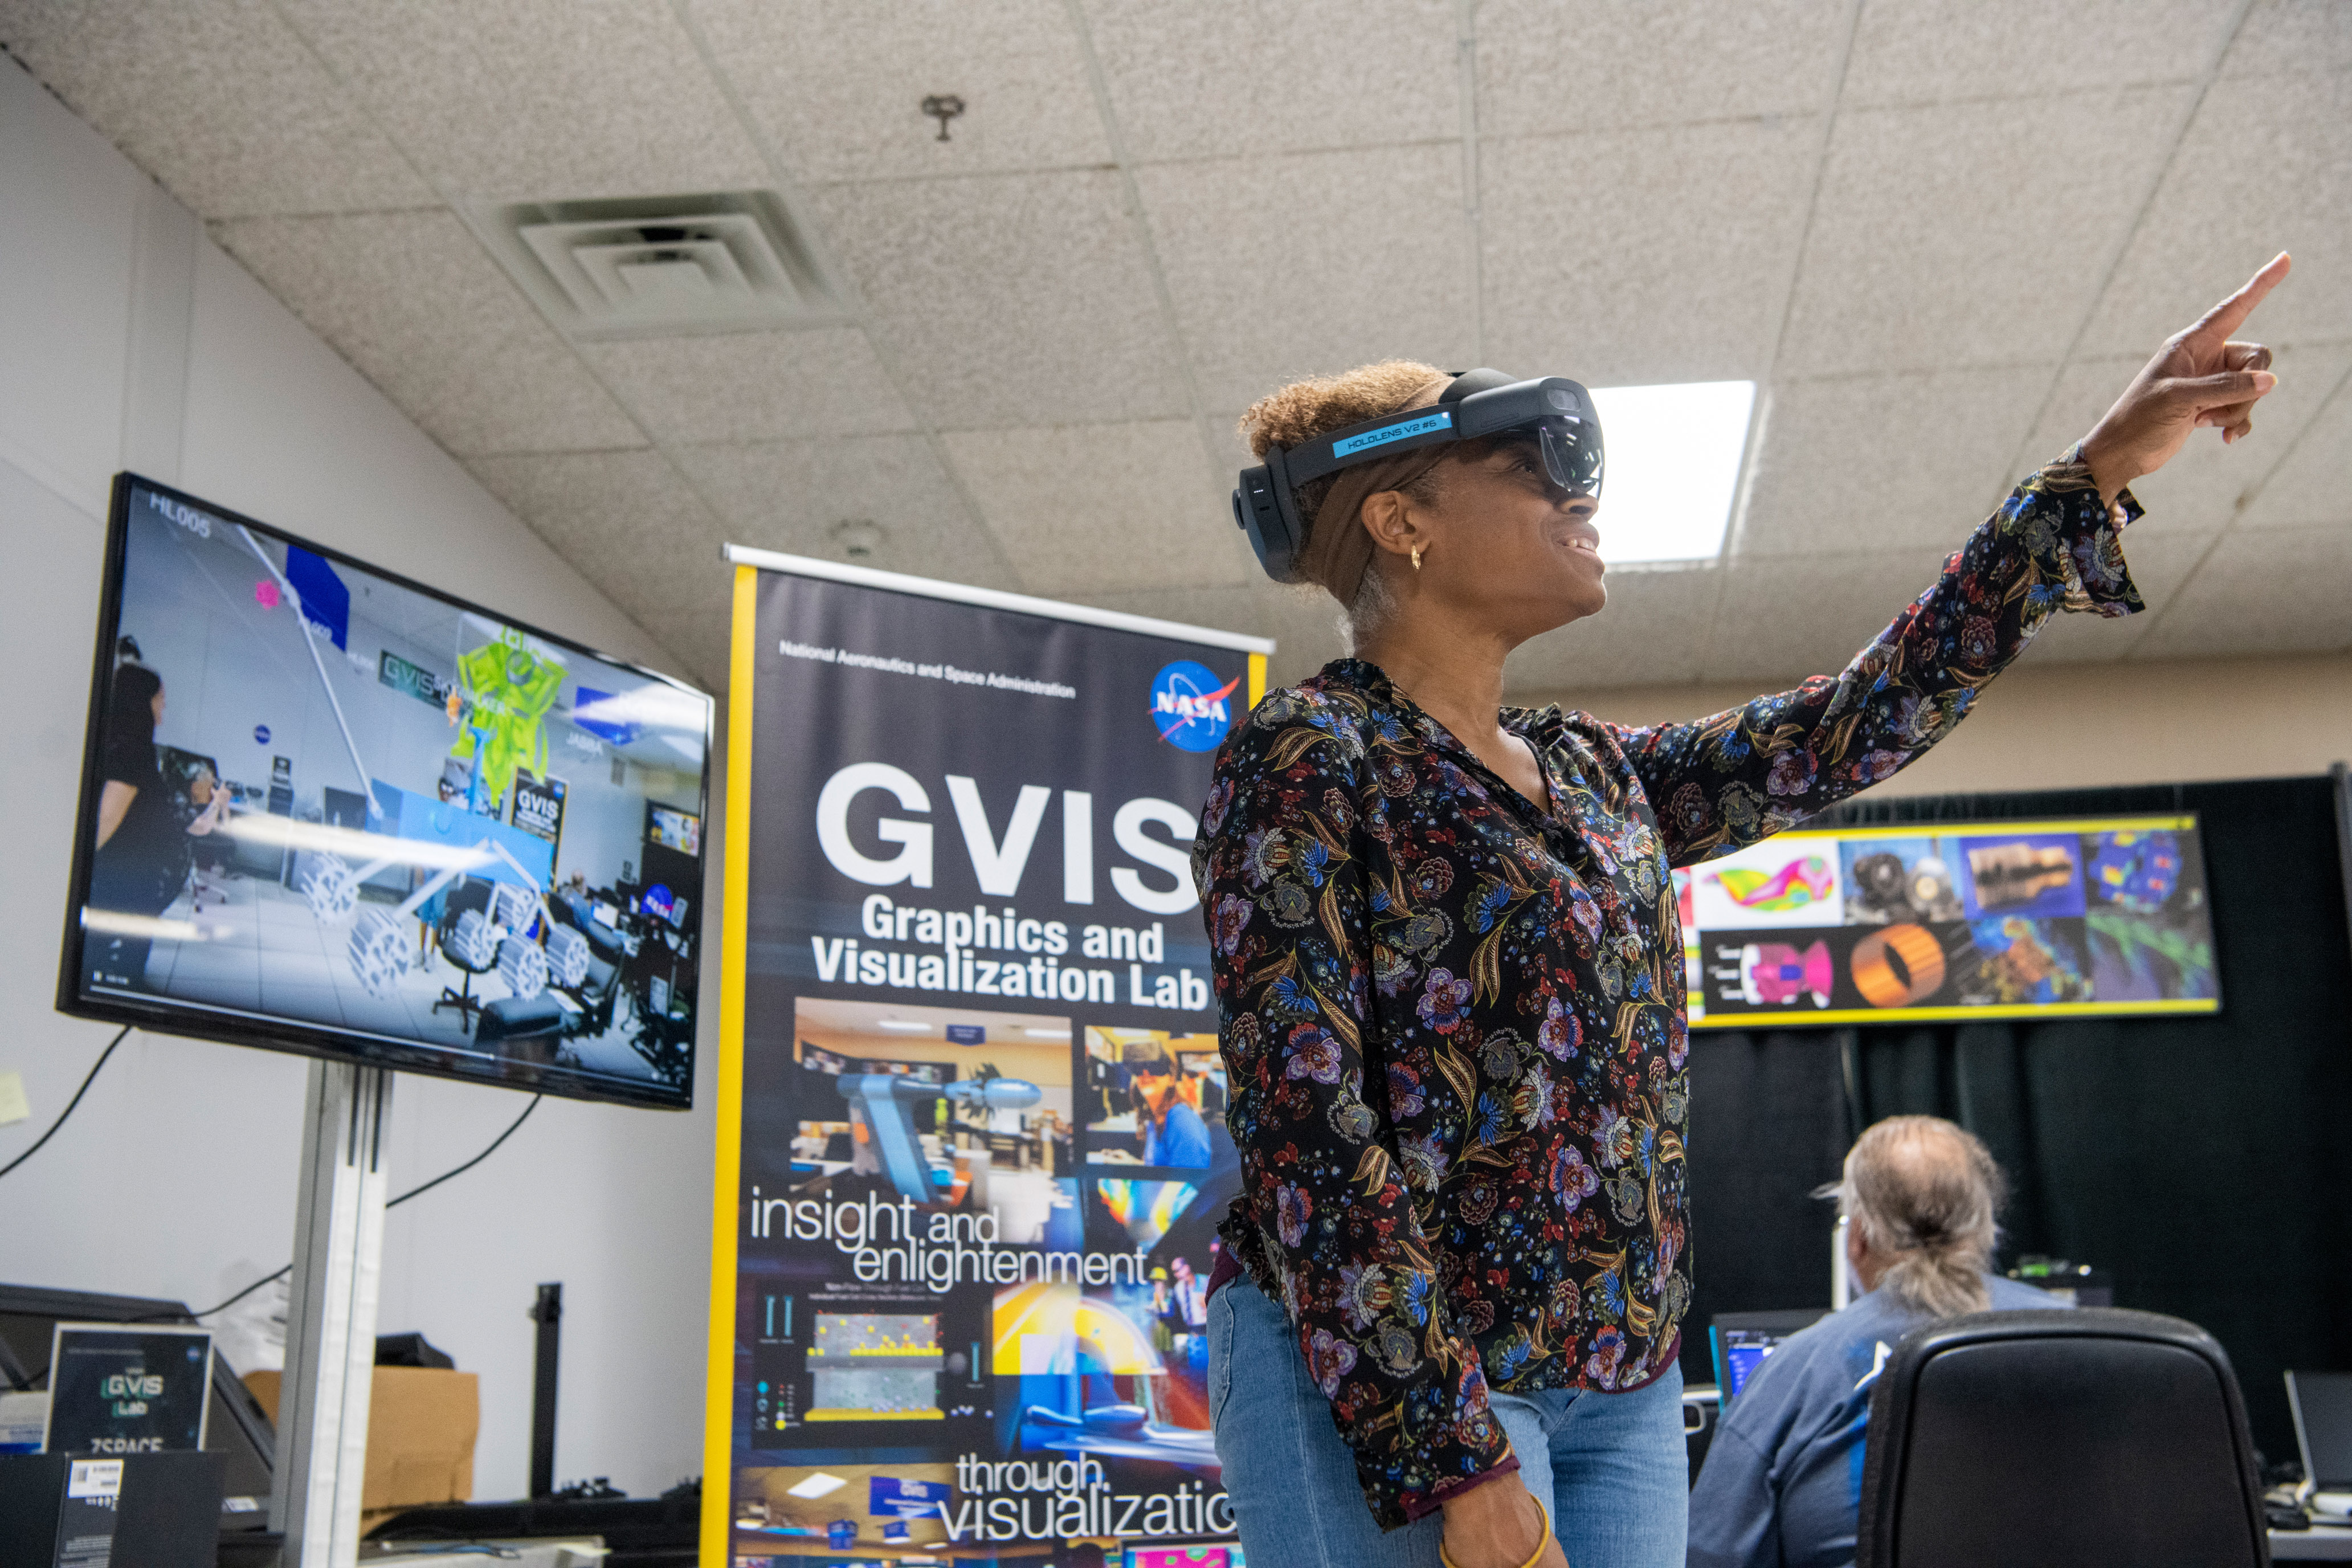 slide 1 - NASA engineer looks through the Microsoft HoloLens to see the spacecrafts the students designed.